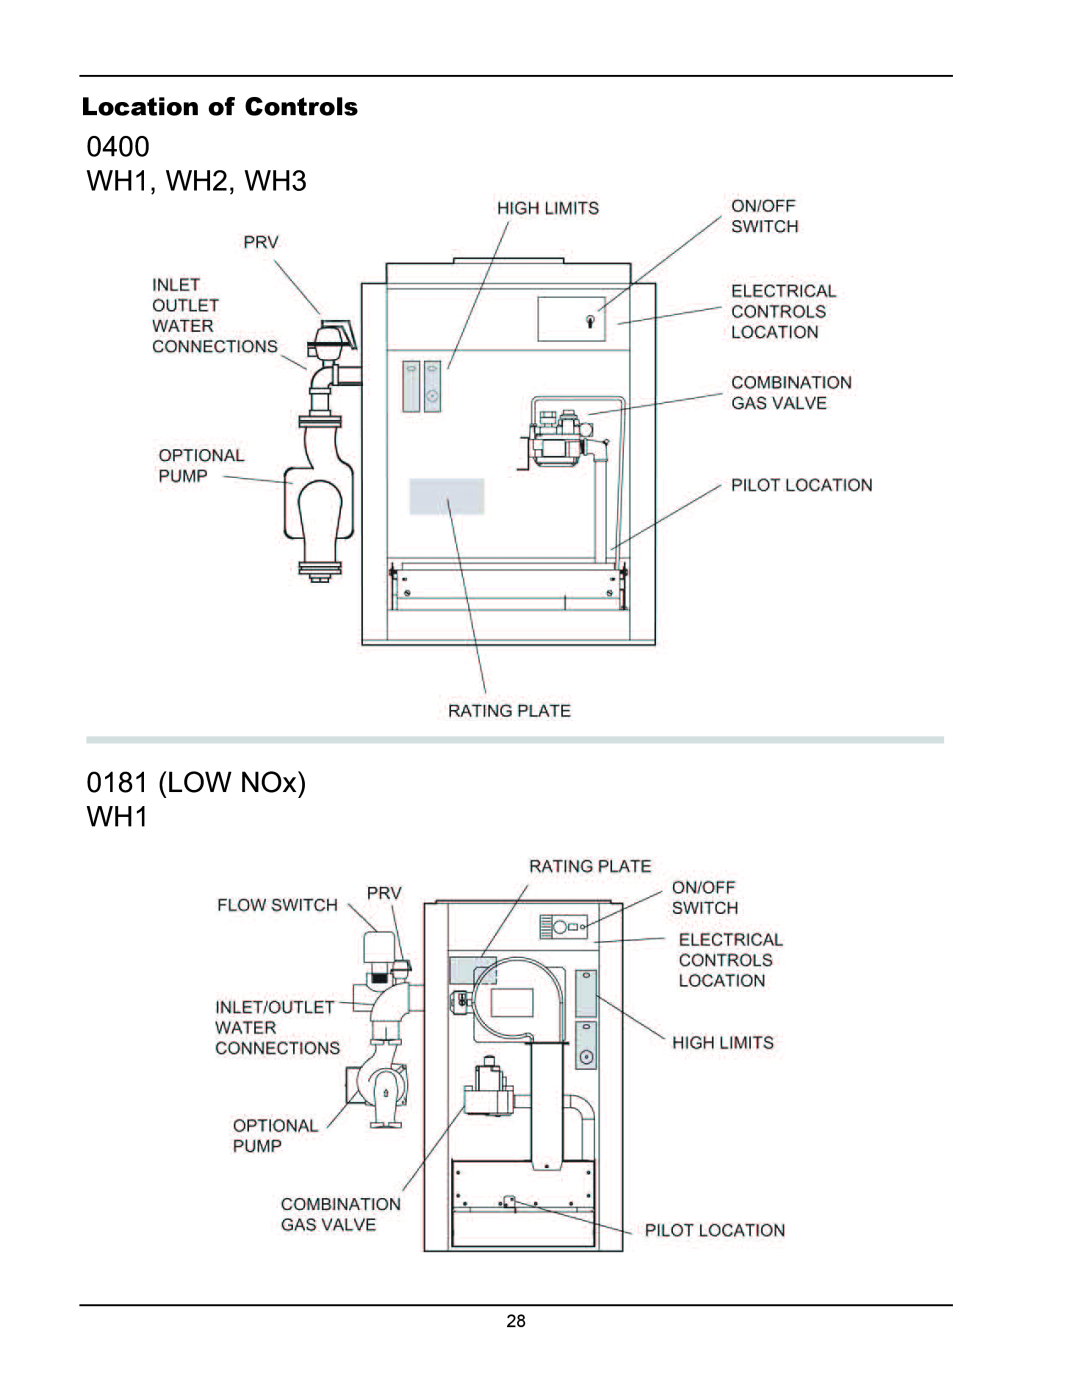 Raypak 1334001 operating instructions Location of Controls, 0400 WH1, WH2, WH3 0181 LOW NOx WH1 